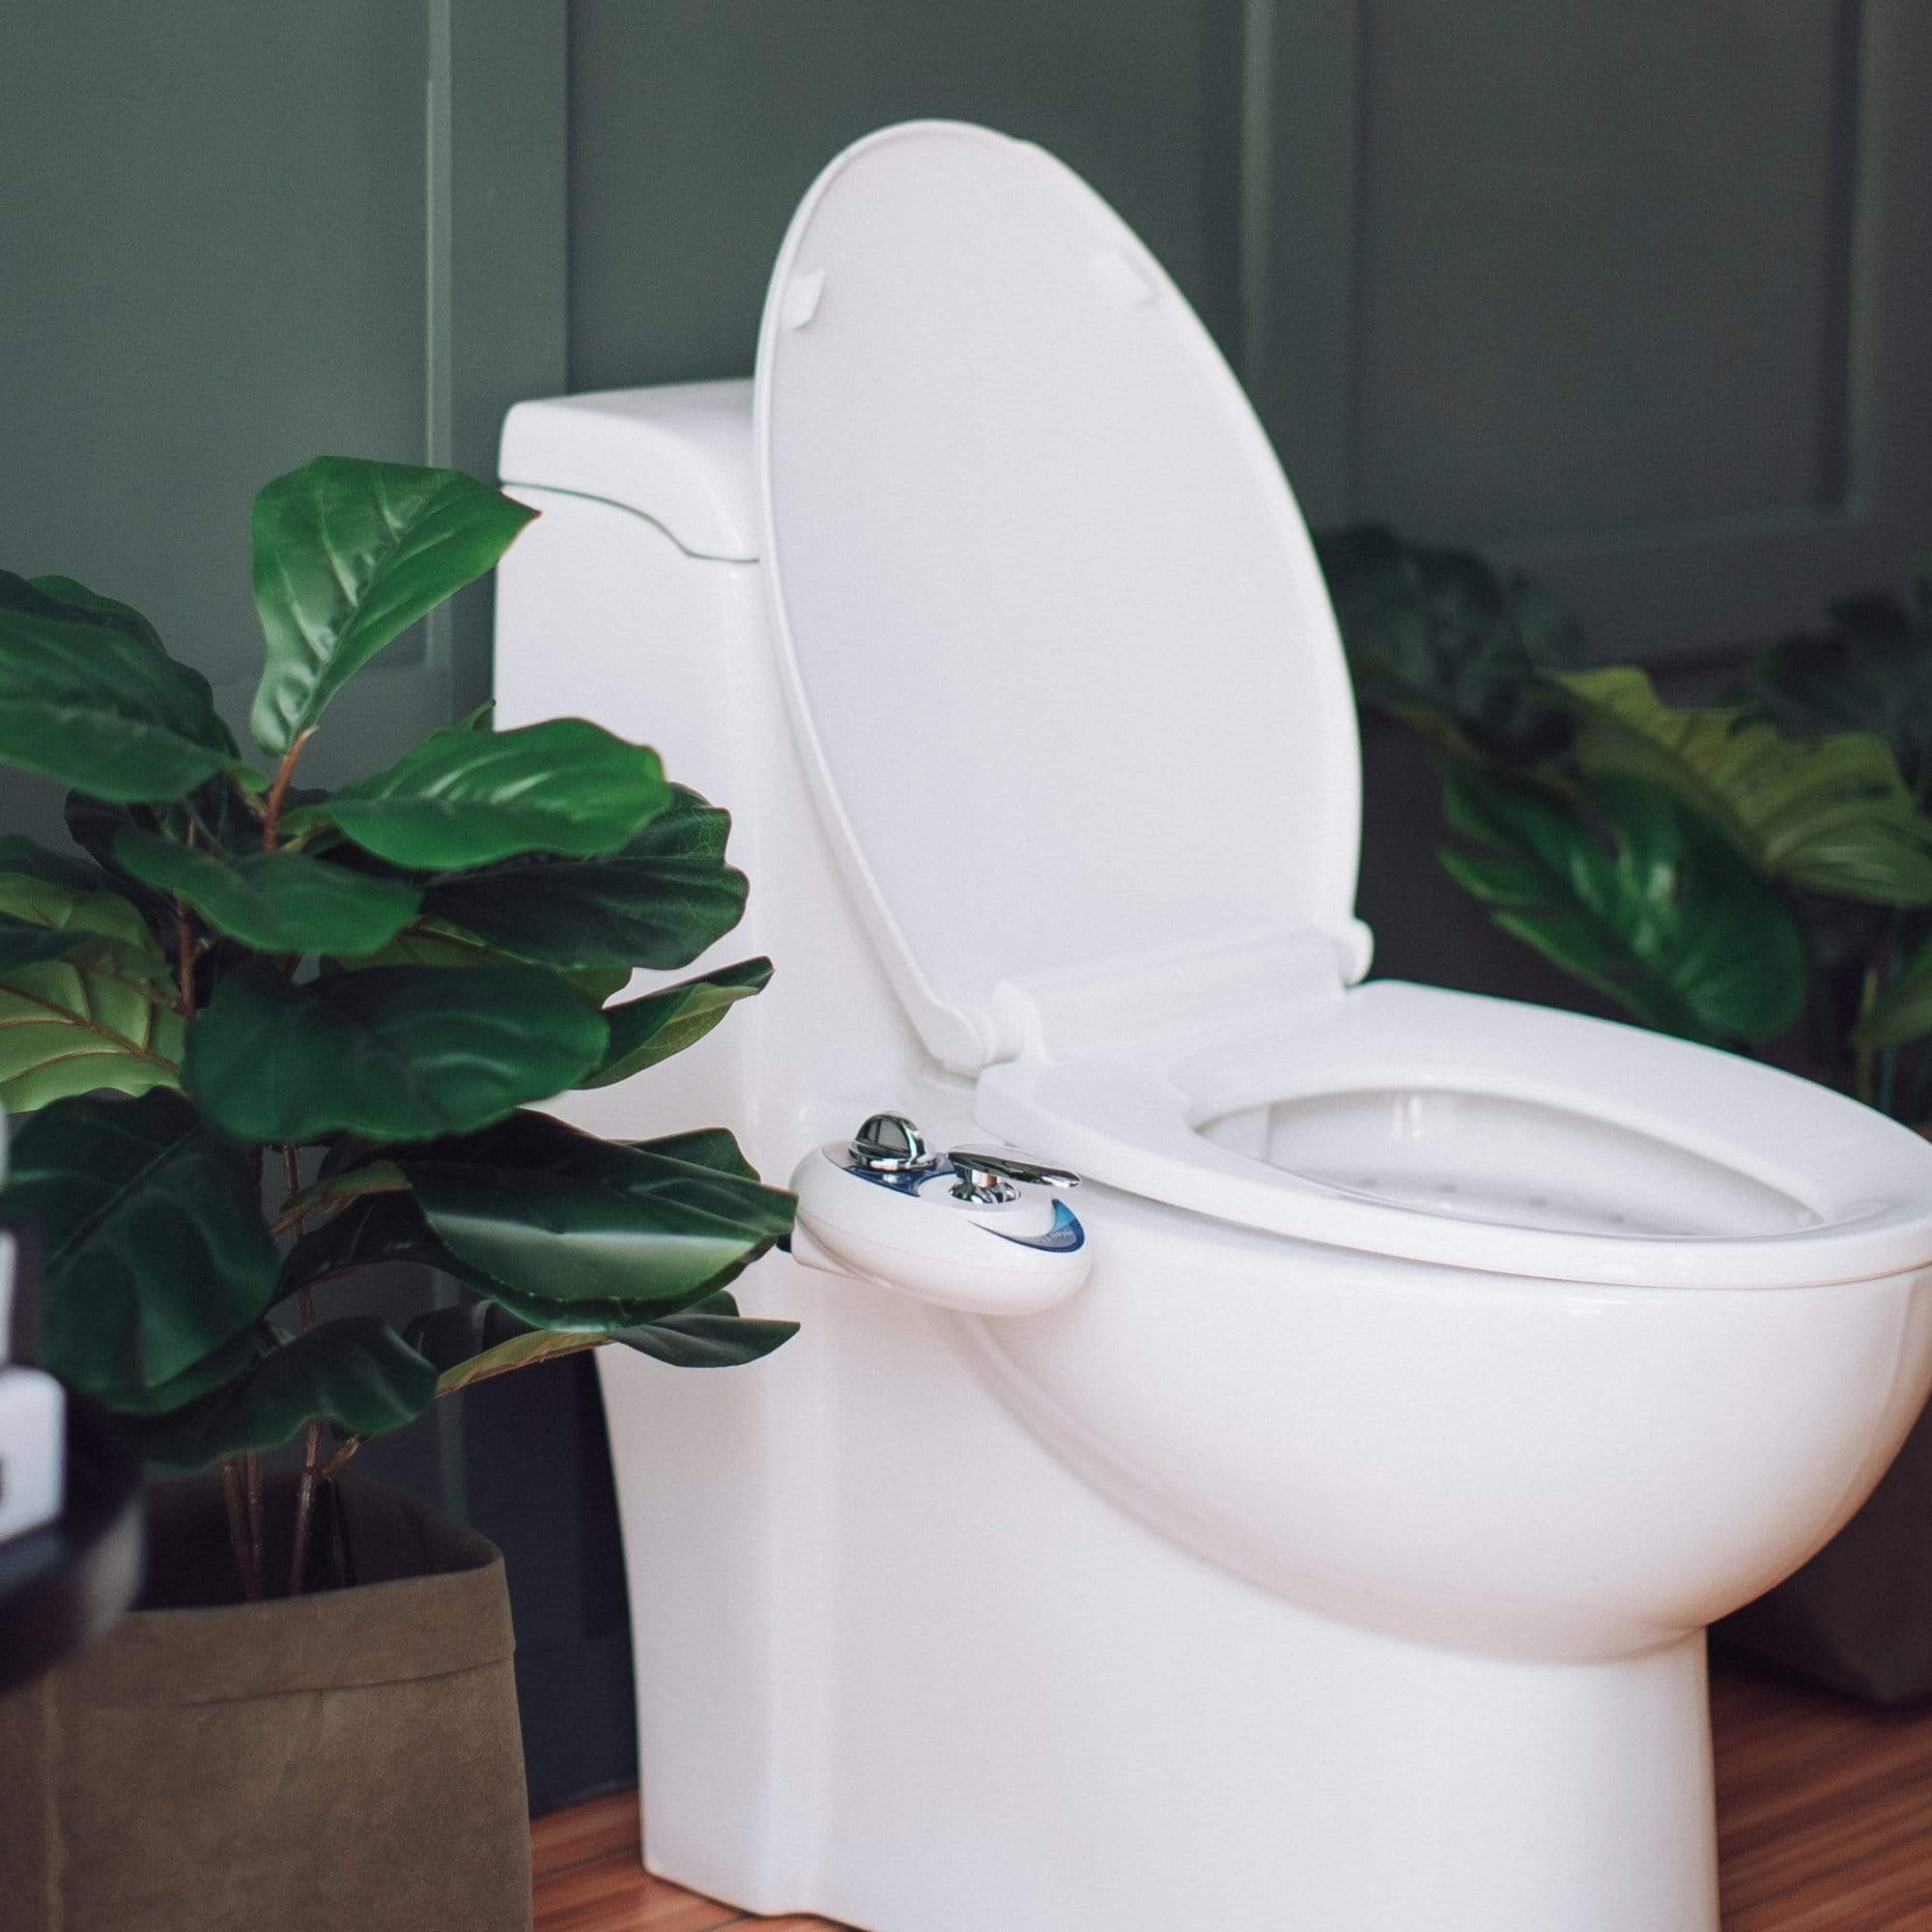 NEO 180 Blue installed on a toilet, in a modern bathroom with plants